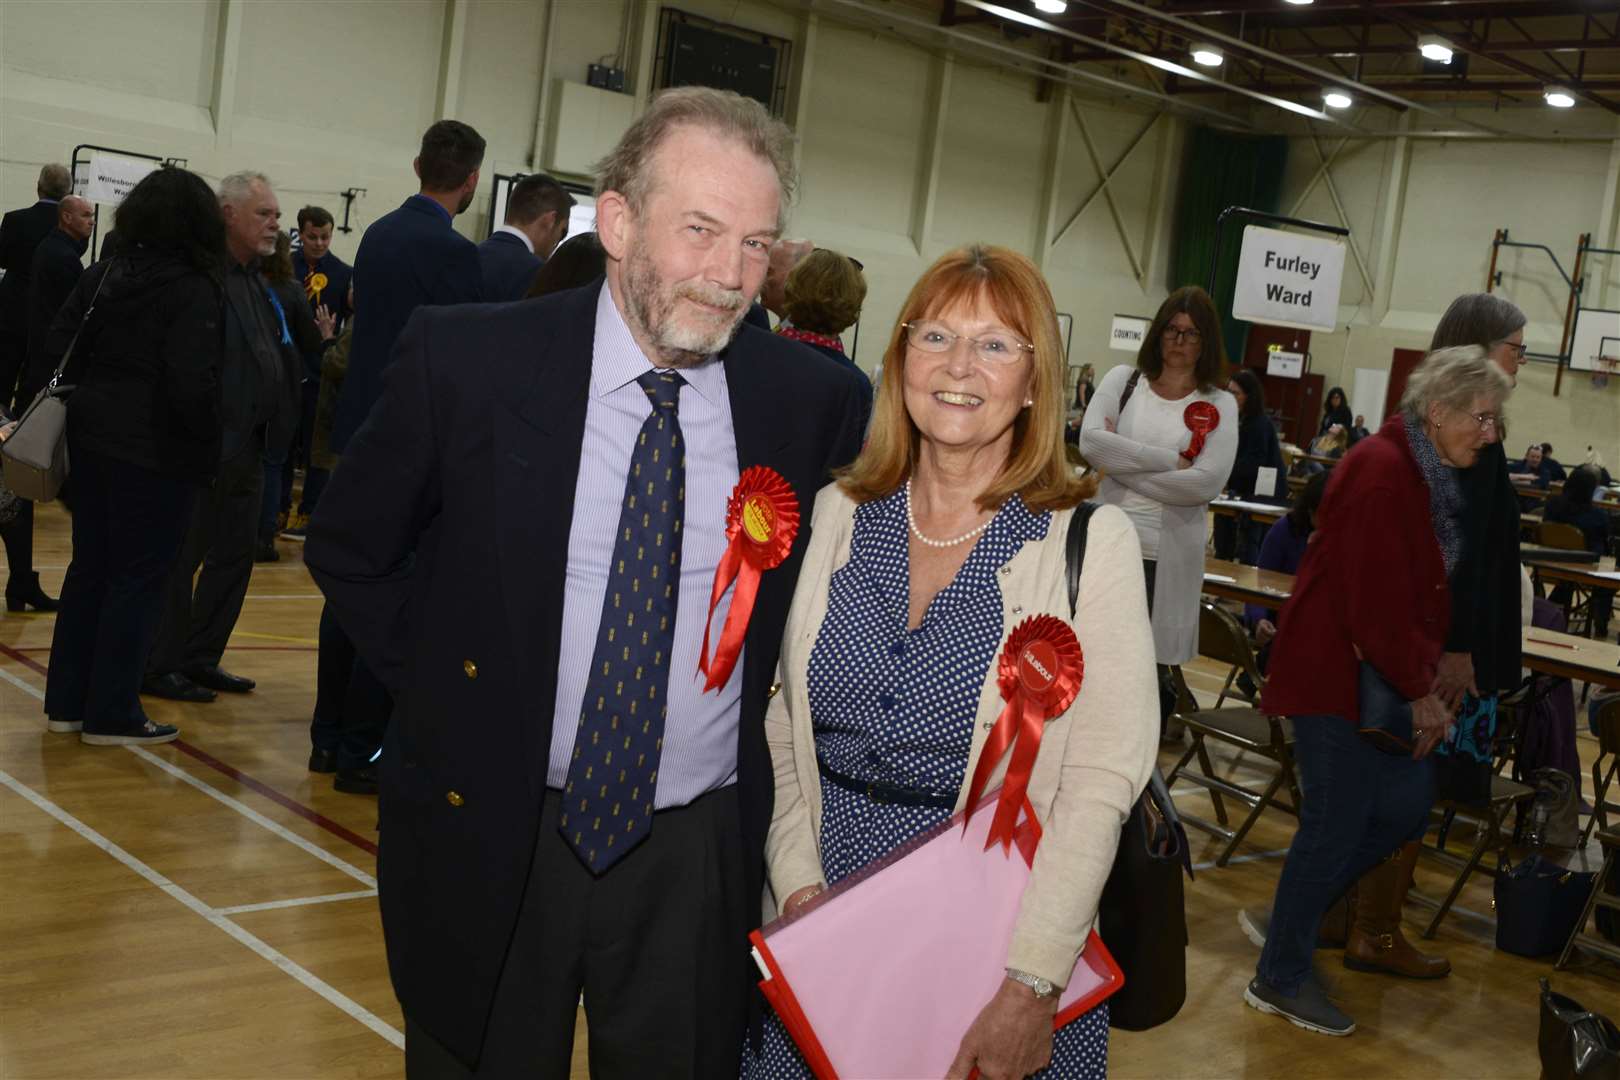 Both Charles and Lyn were voted in as borough councillors last year